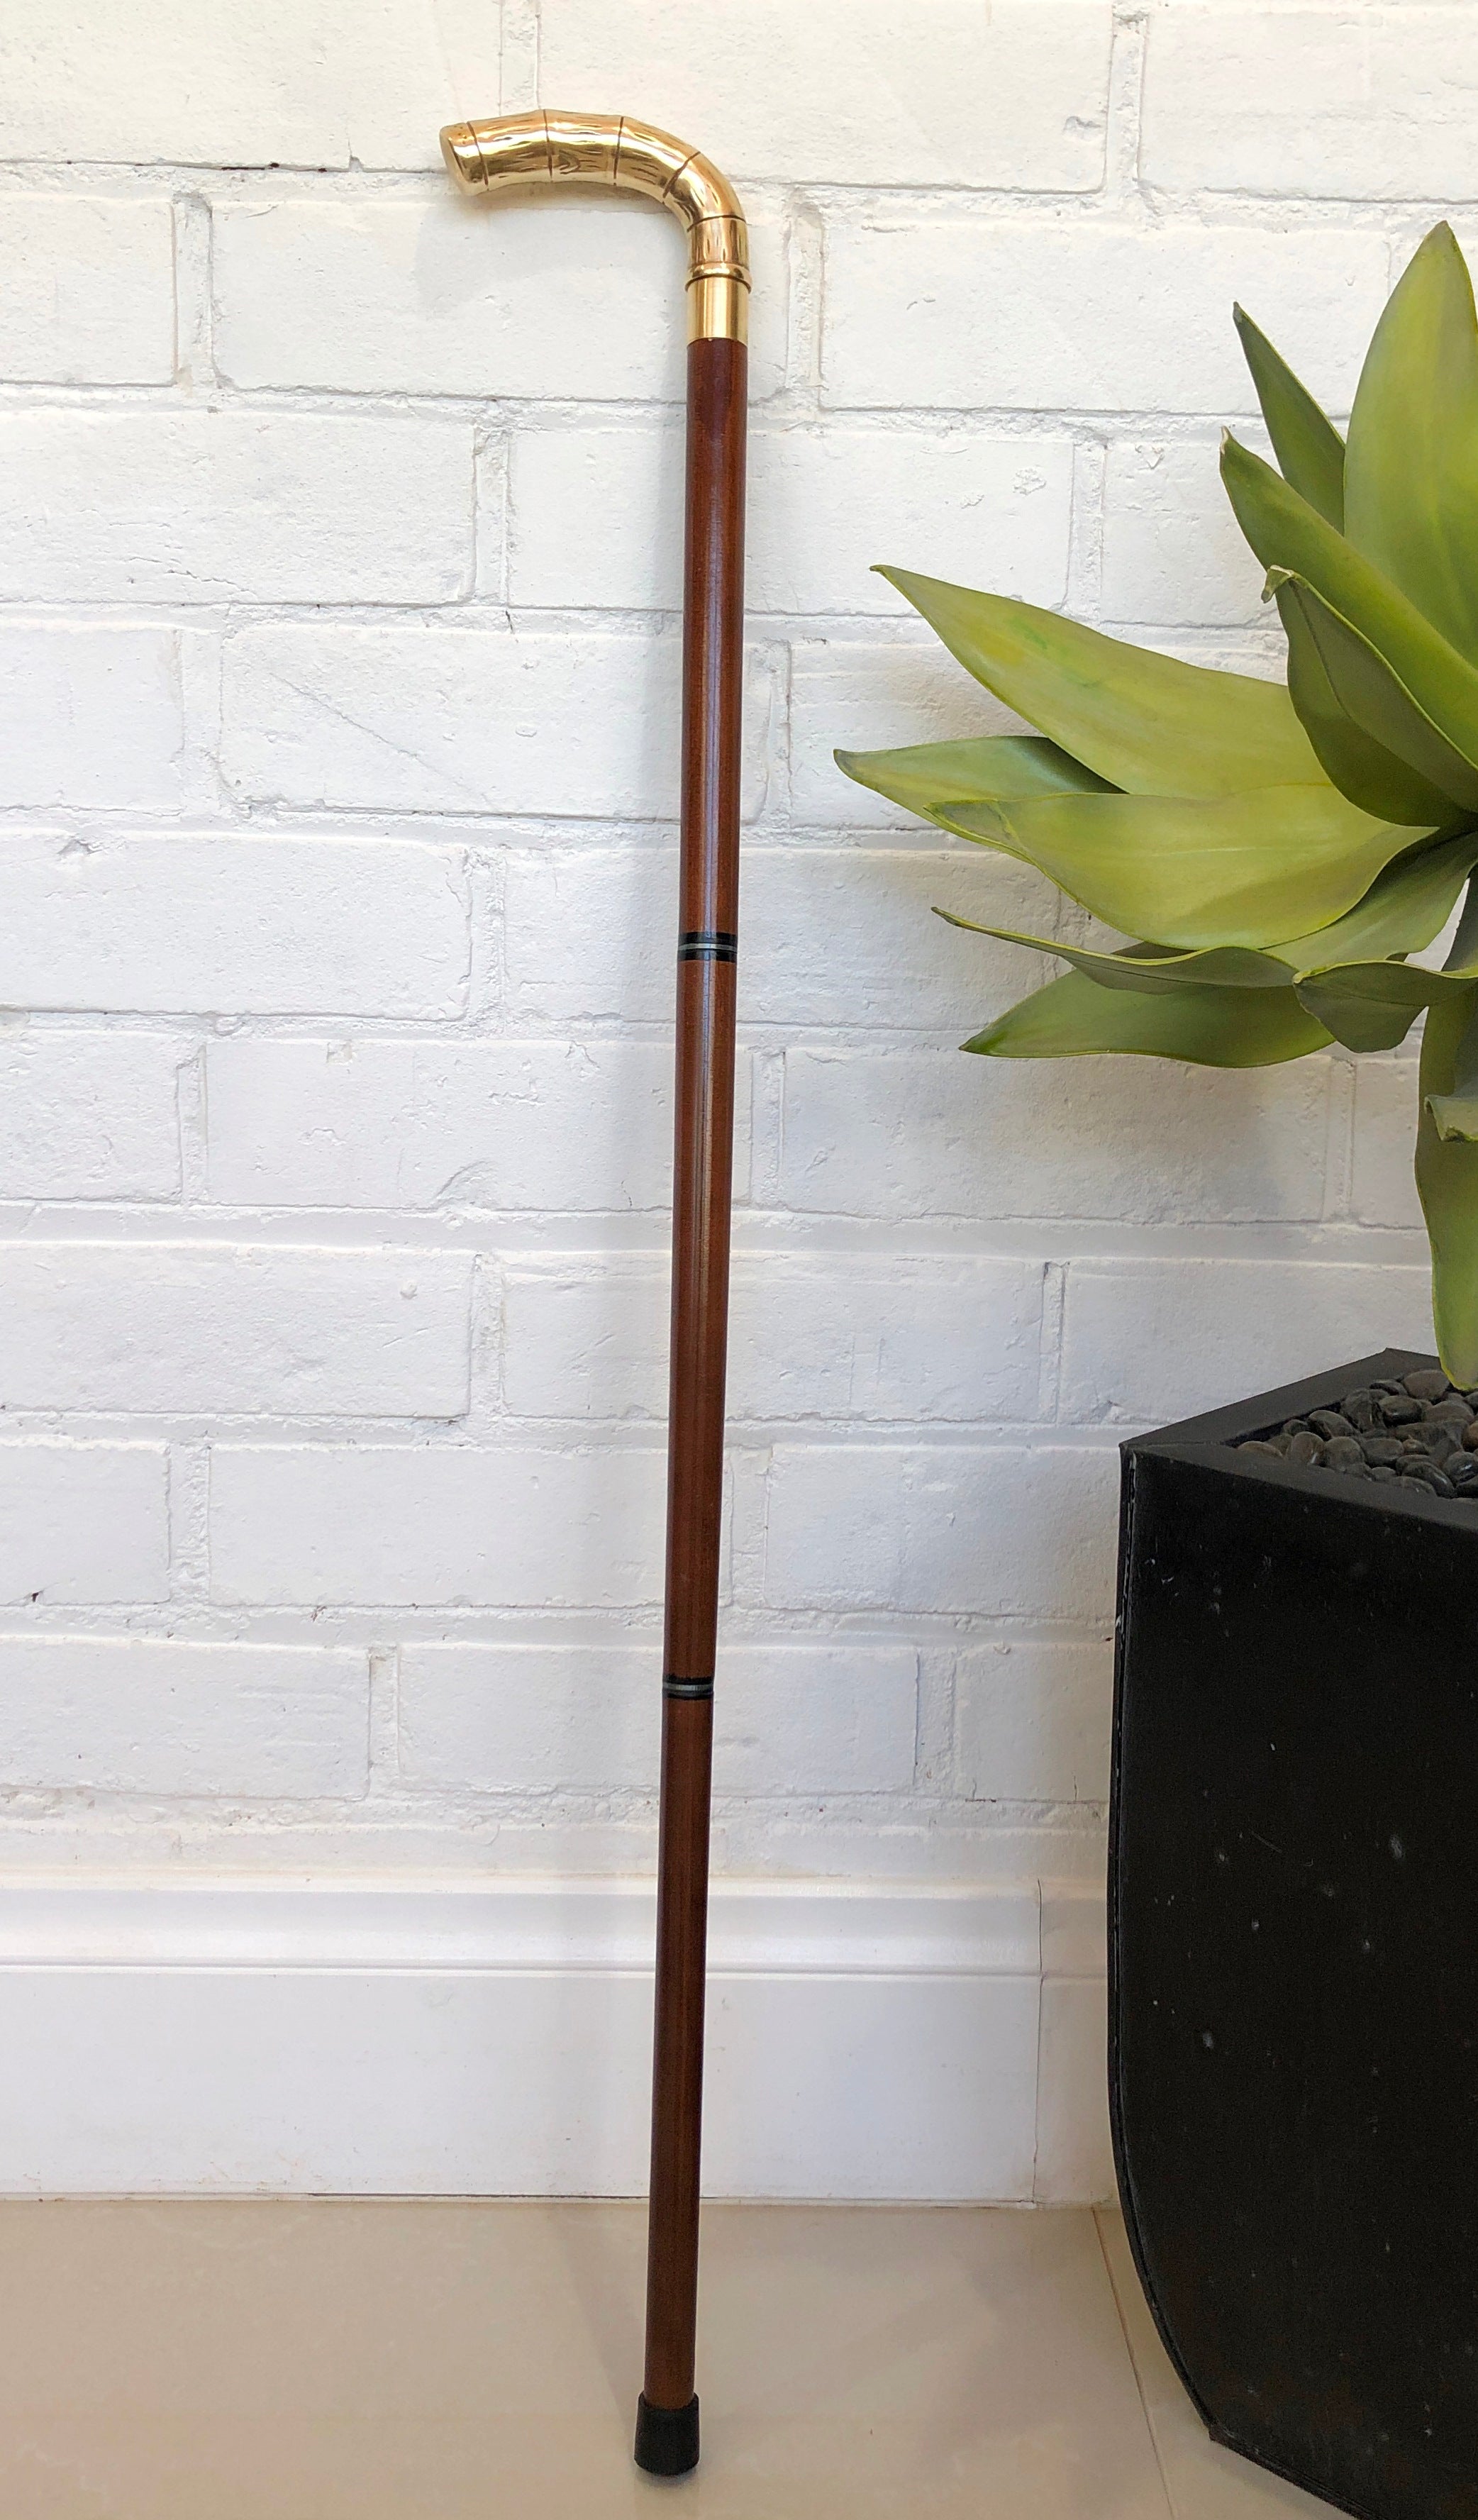 VINTAGE Wood Walking Stick Cane with BRASS Handle | eXibit collection